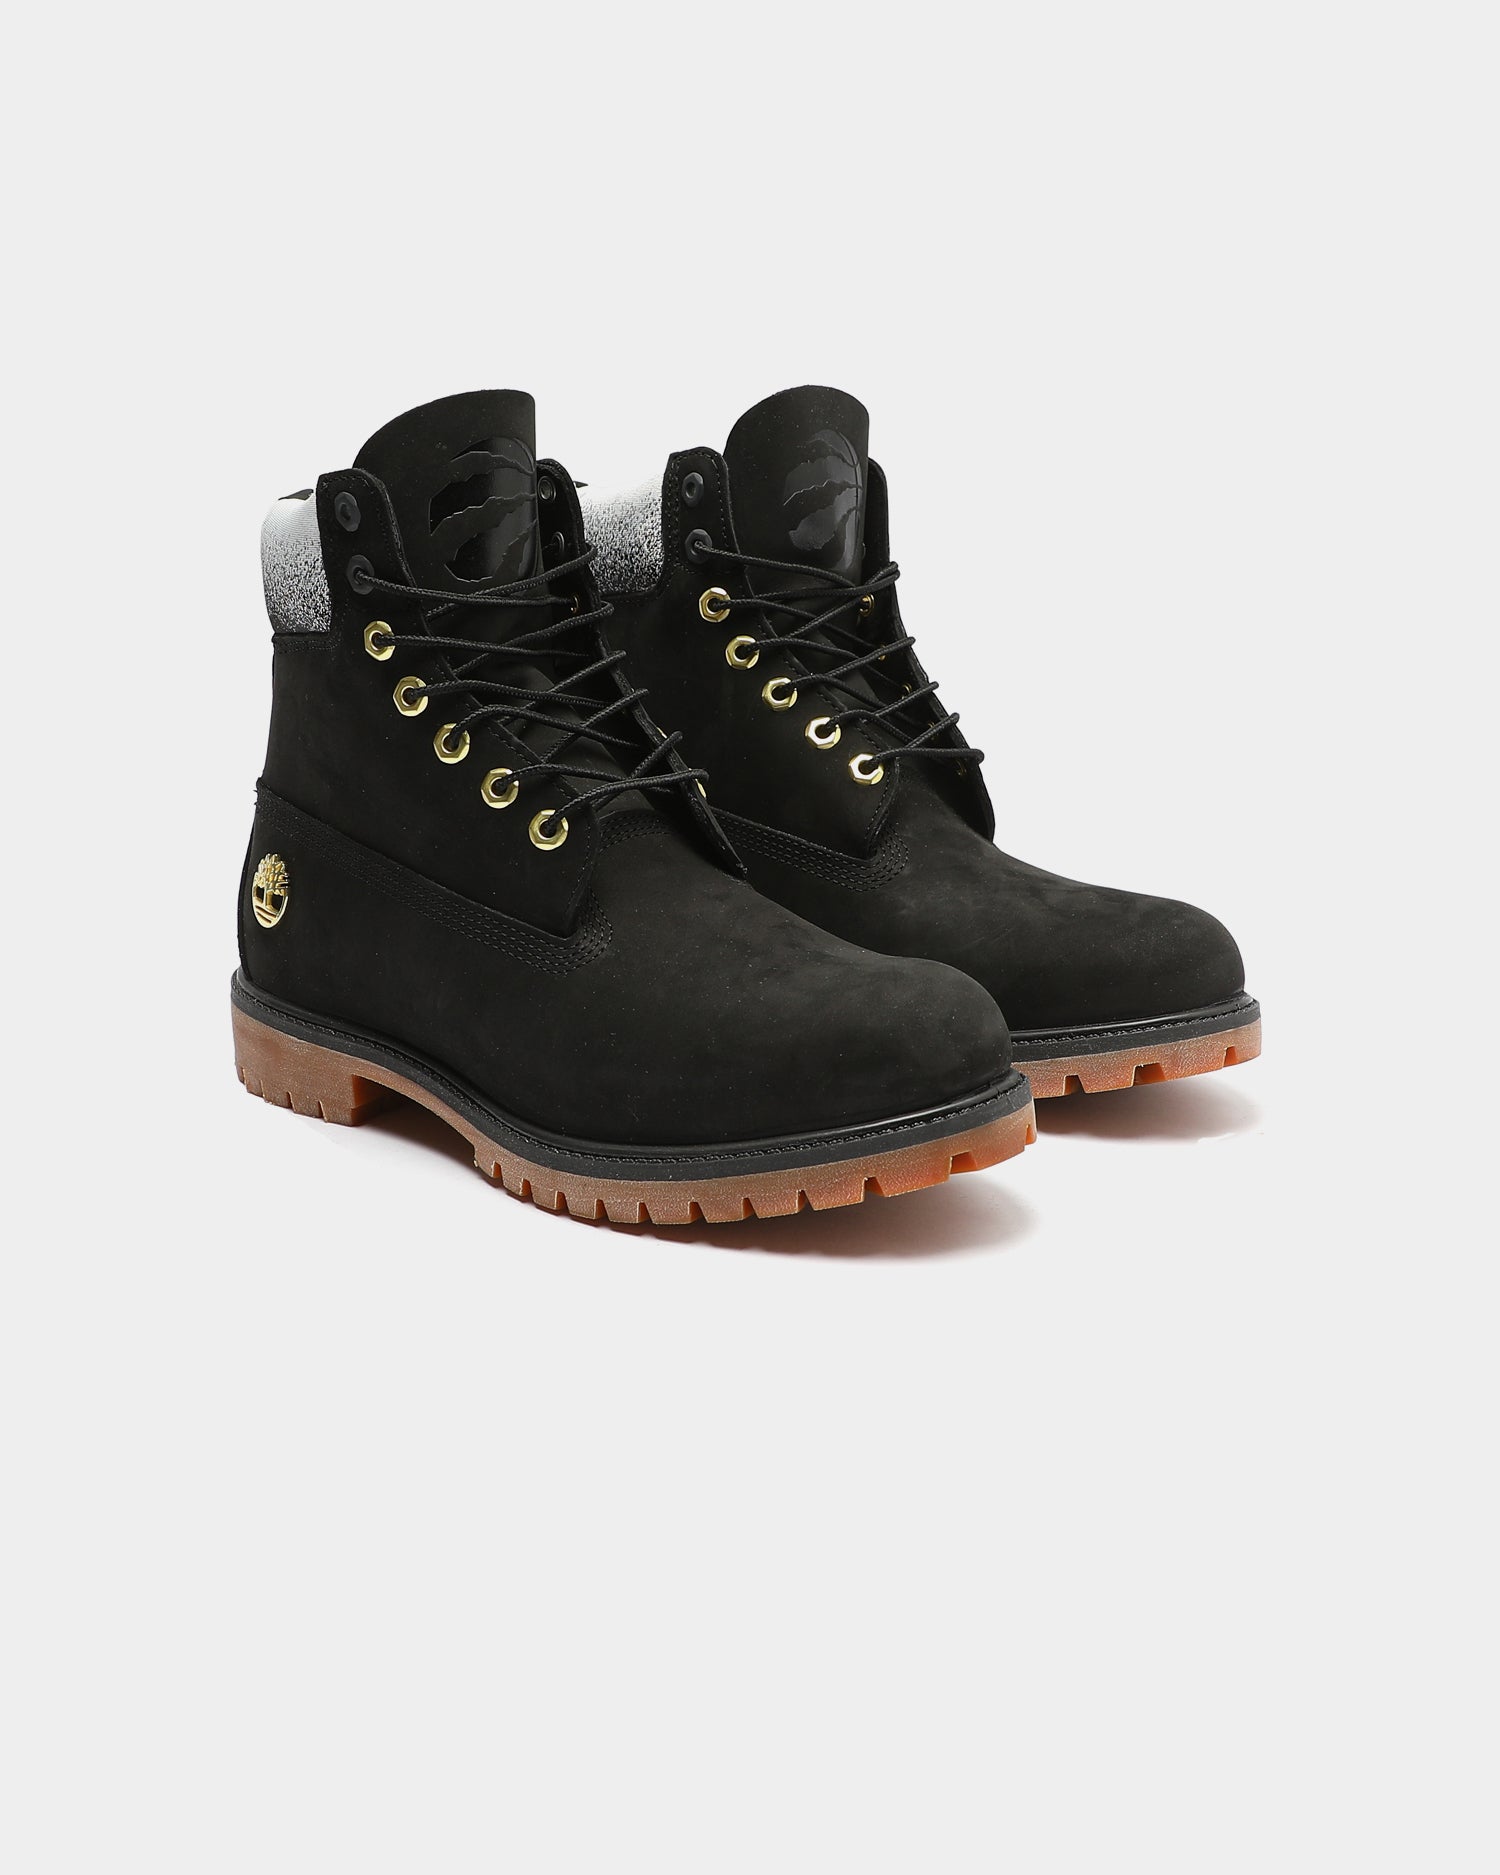 black and gold champion timberland boots